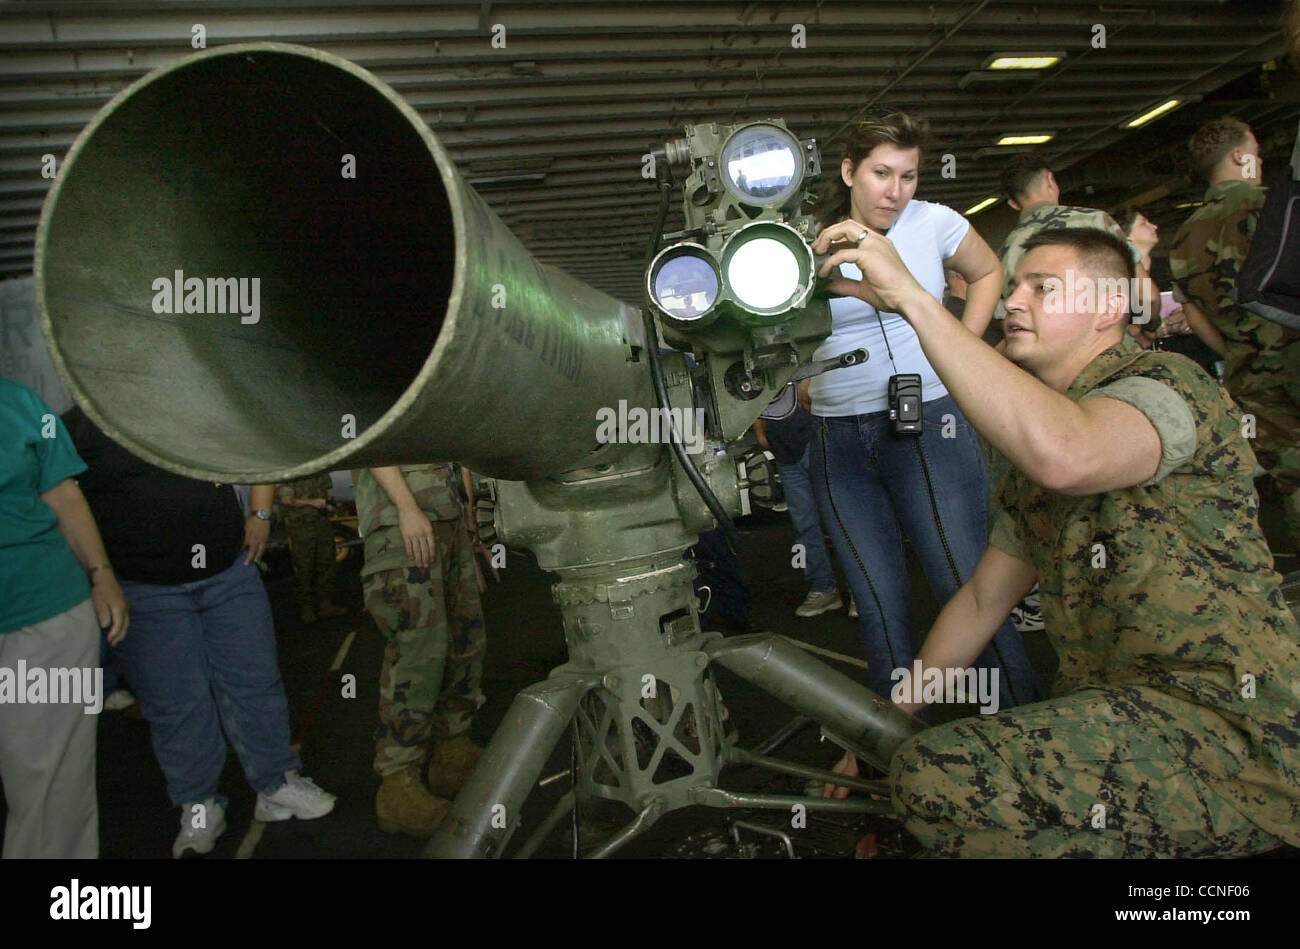 (Published 07/22/2003, A-6): Marine Sgt. Marcelino Barajas, right, demonstrated the TOW (Tube launched, Optically Tracked, Wire-Guided Missile System) missile launcher to Angel Santoyo of San Diego, during a static display of weapons for relatives of crew returning with the USS Tarawa. According to  Stock Photo